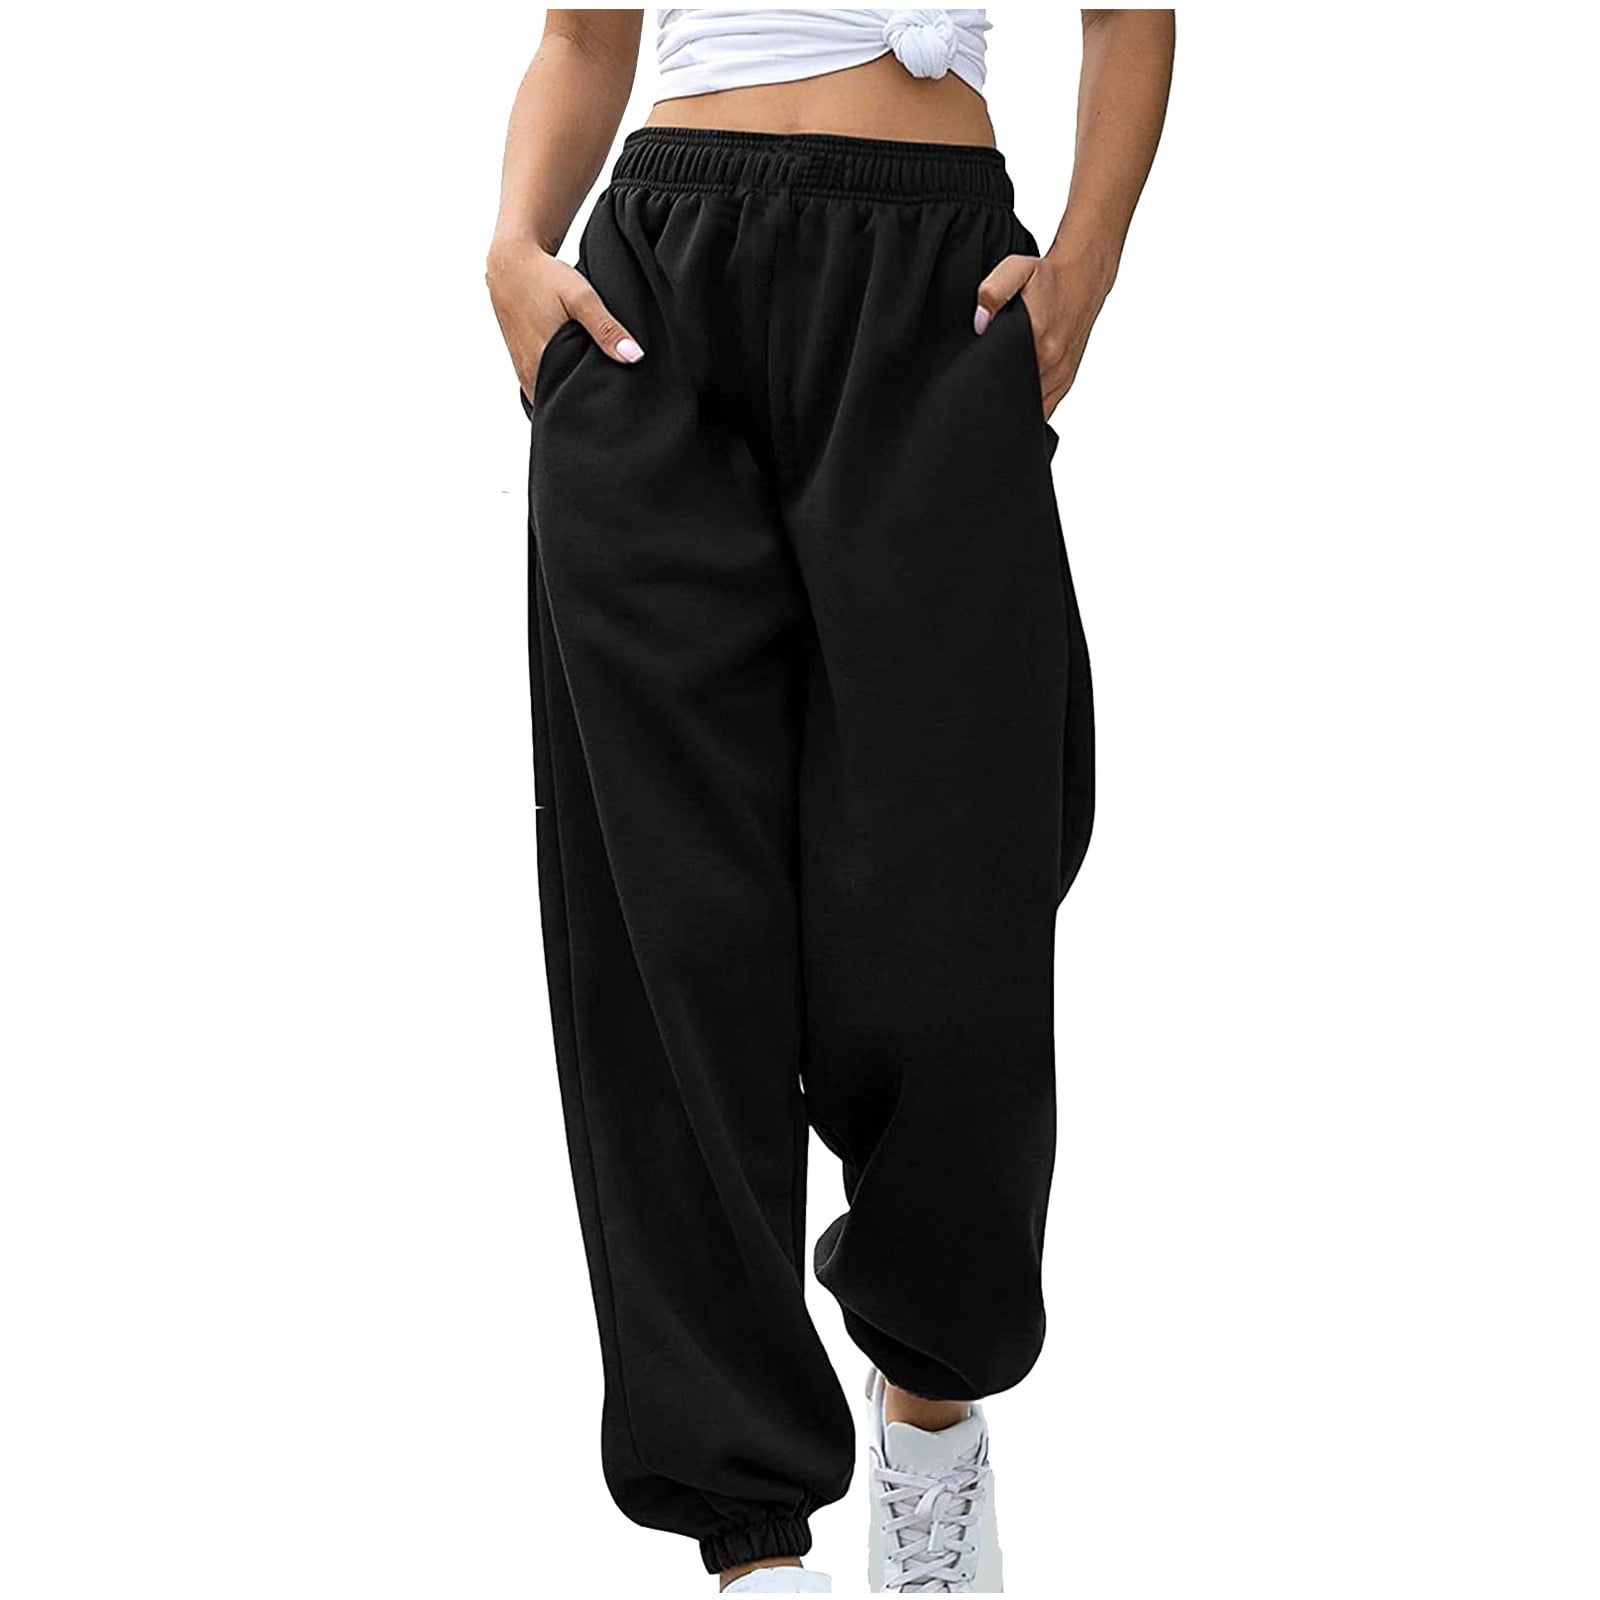 HSMQHJWE Sweatpants For Women Womens Joggers With Pockets Lounge Pants For  Yoga Workout Running Sweat Pants Women Casual